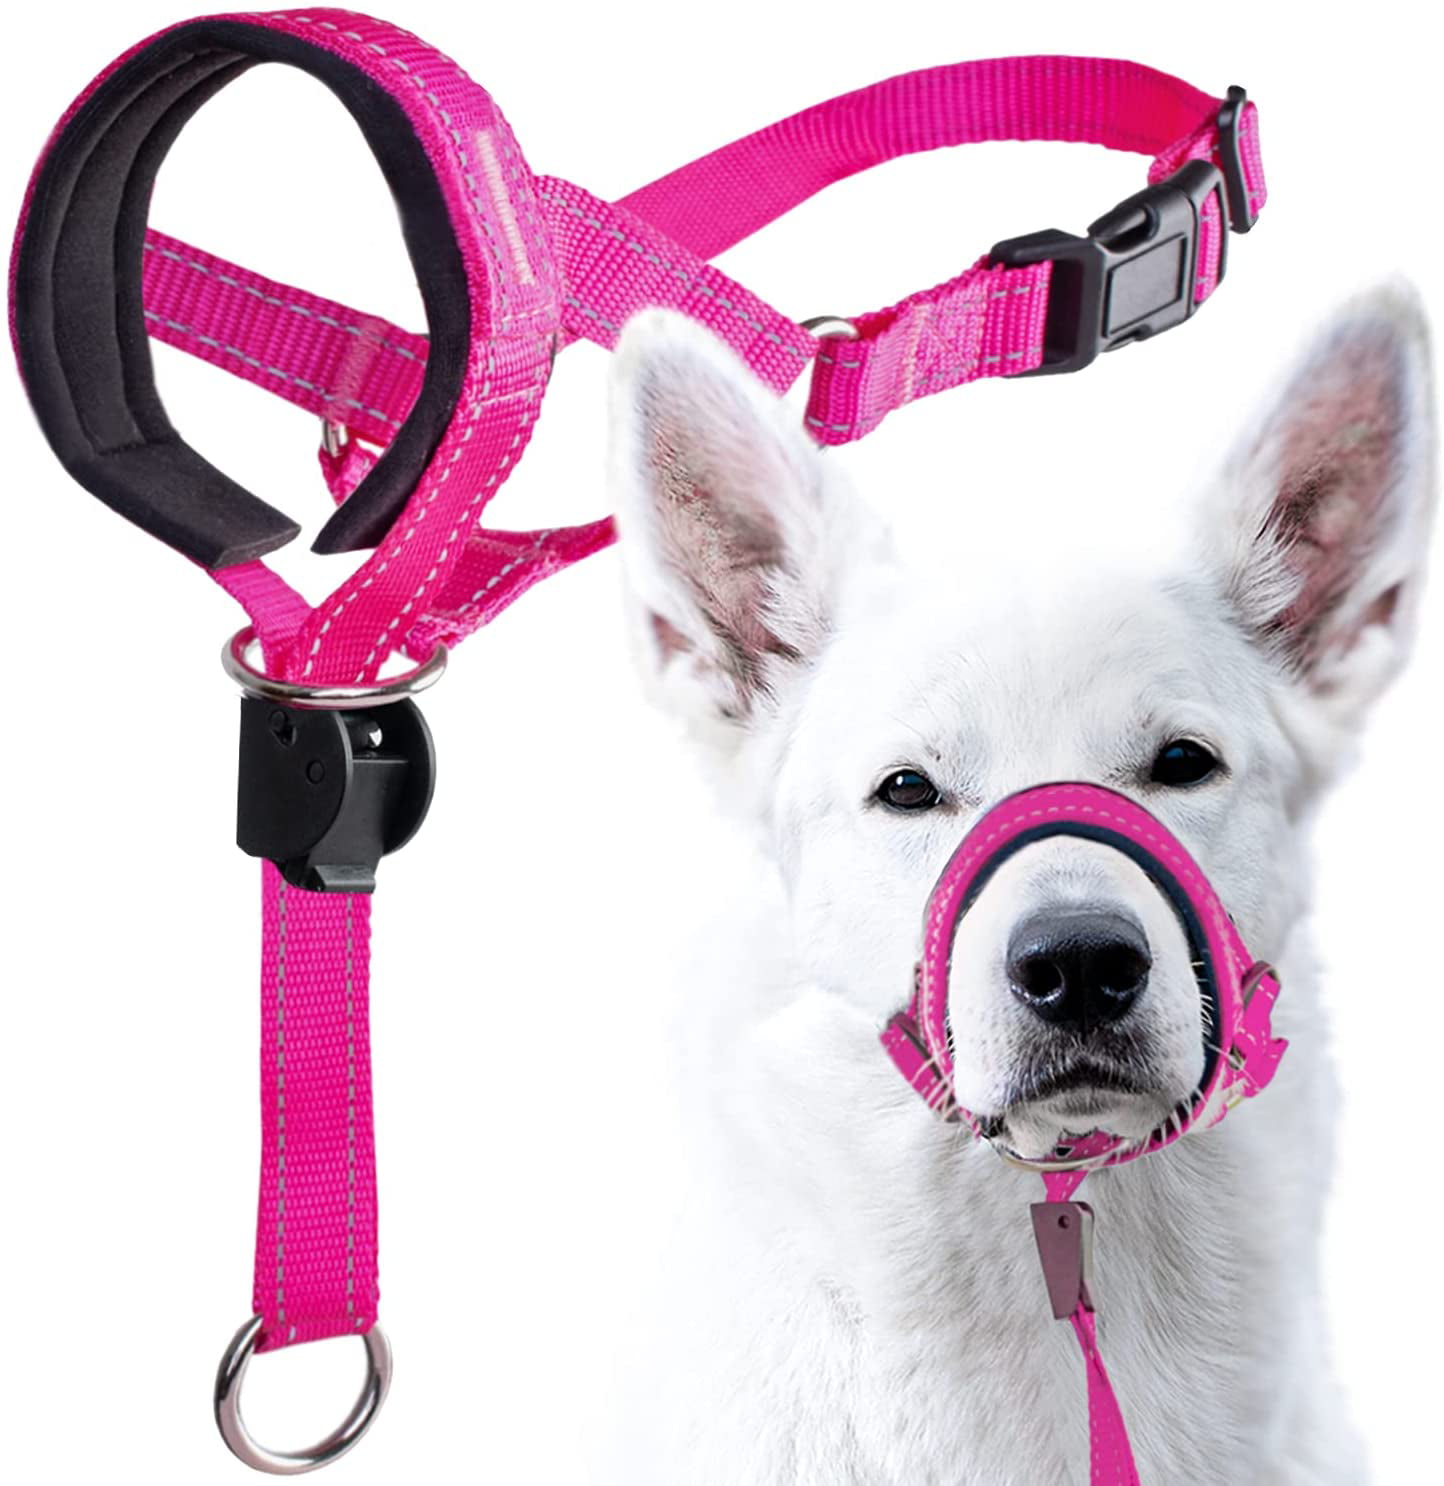 GoodBoy Dog Head Halter with Safety Strap Head Collar Training Guide Included Size 1, Black Padded Headcollar for Small Medium and Large Dog Sizes Stops Heavy Pulling On The Leash